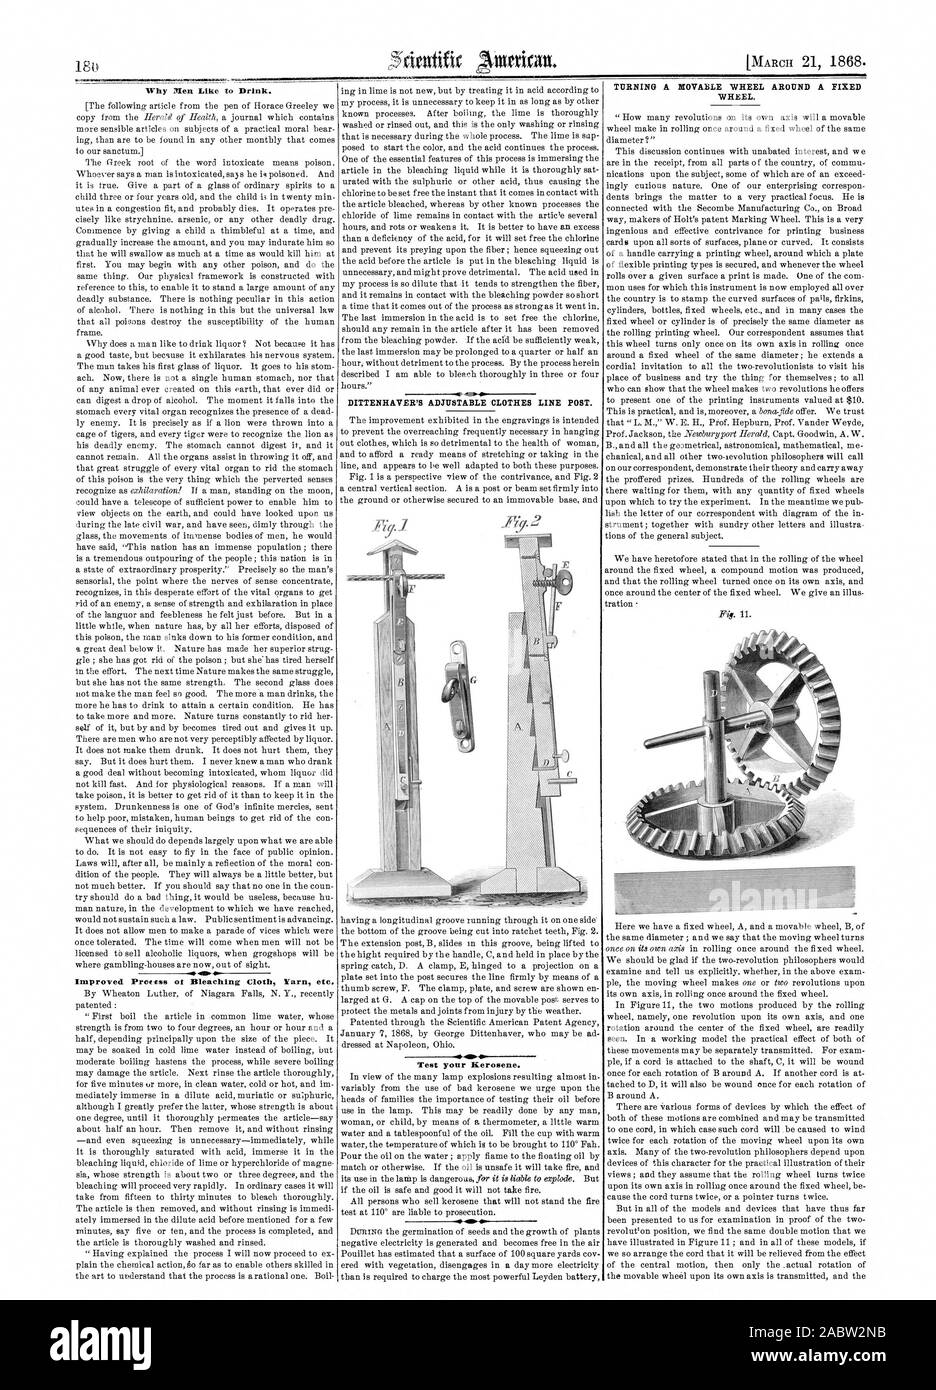 Why Men Like to Drink. Improved Proms of Bleaching Cloth Yarn etc. DITTENHAVER'S ADJUSTABLE CLOTHES LINE POST. Test your Kerosene. TURNING A MOVABLE WHEEL AROUND A FIXED WHEEL., scientific american, 1868-03-21 Stock Photo